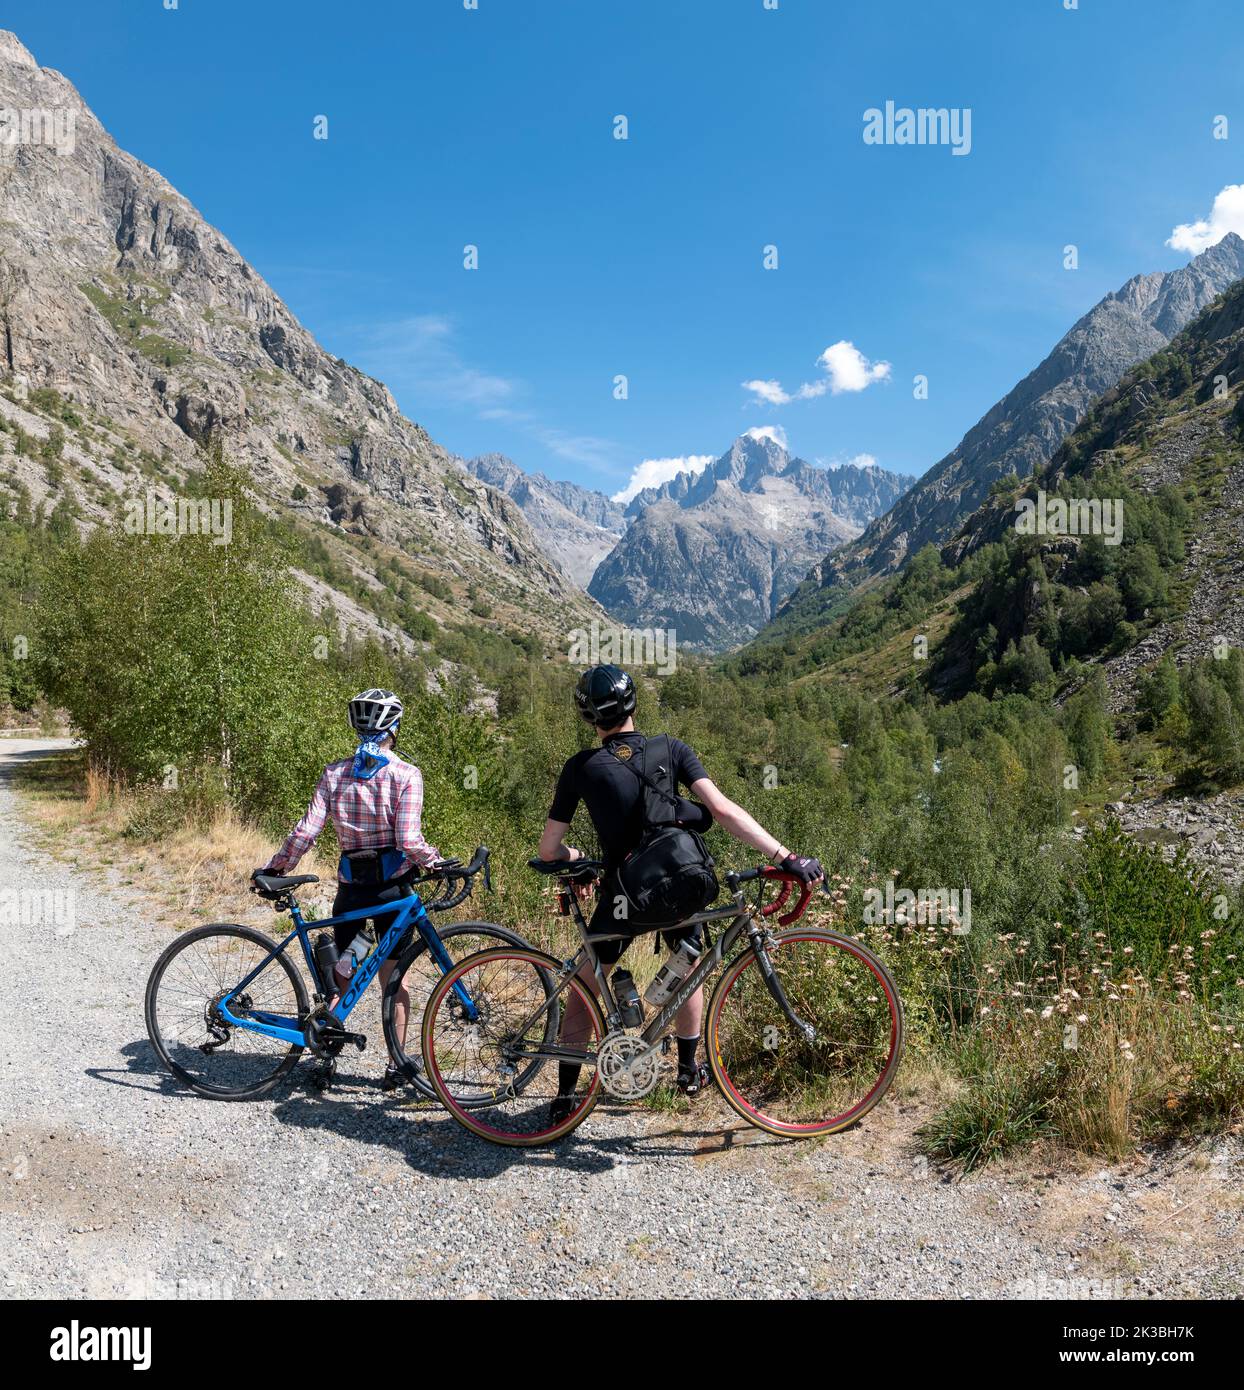 Two cyclists, Mother and son, take in the view in the high alpine valley above Saint-Christophe-en-Oisans, French Alps. Stock Photo